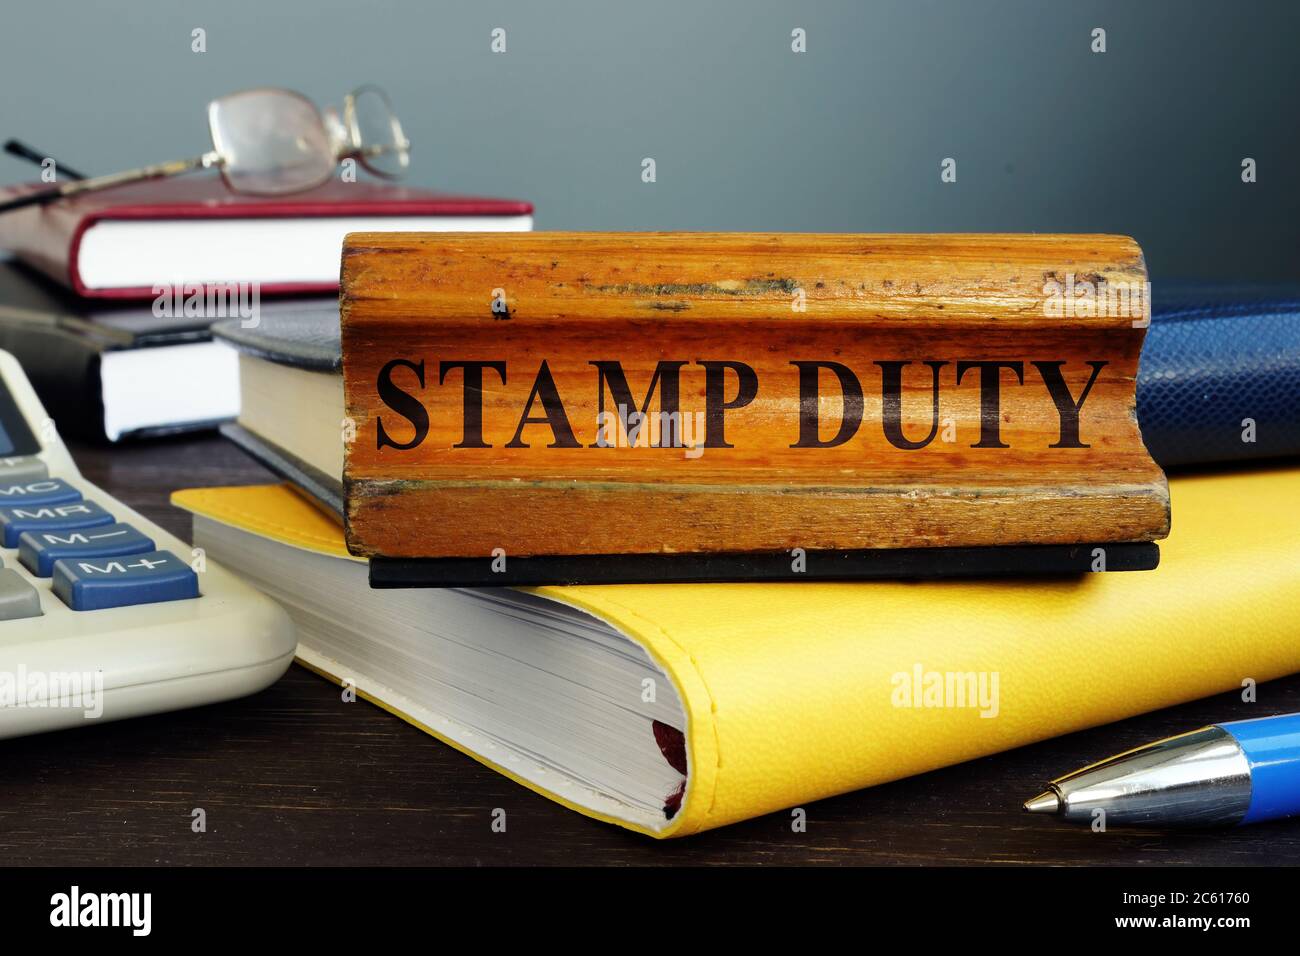 Stamp duty sign and office supply with business papers. Stock Photo